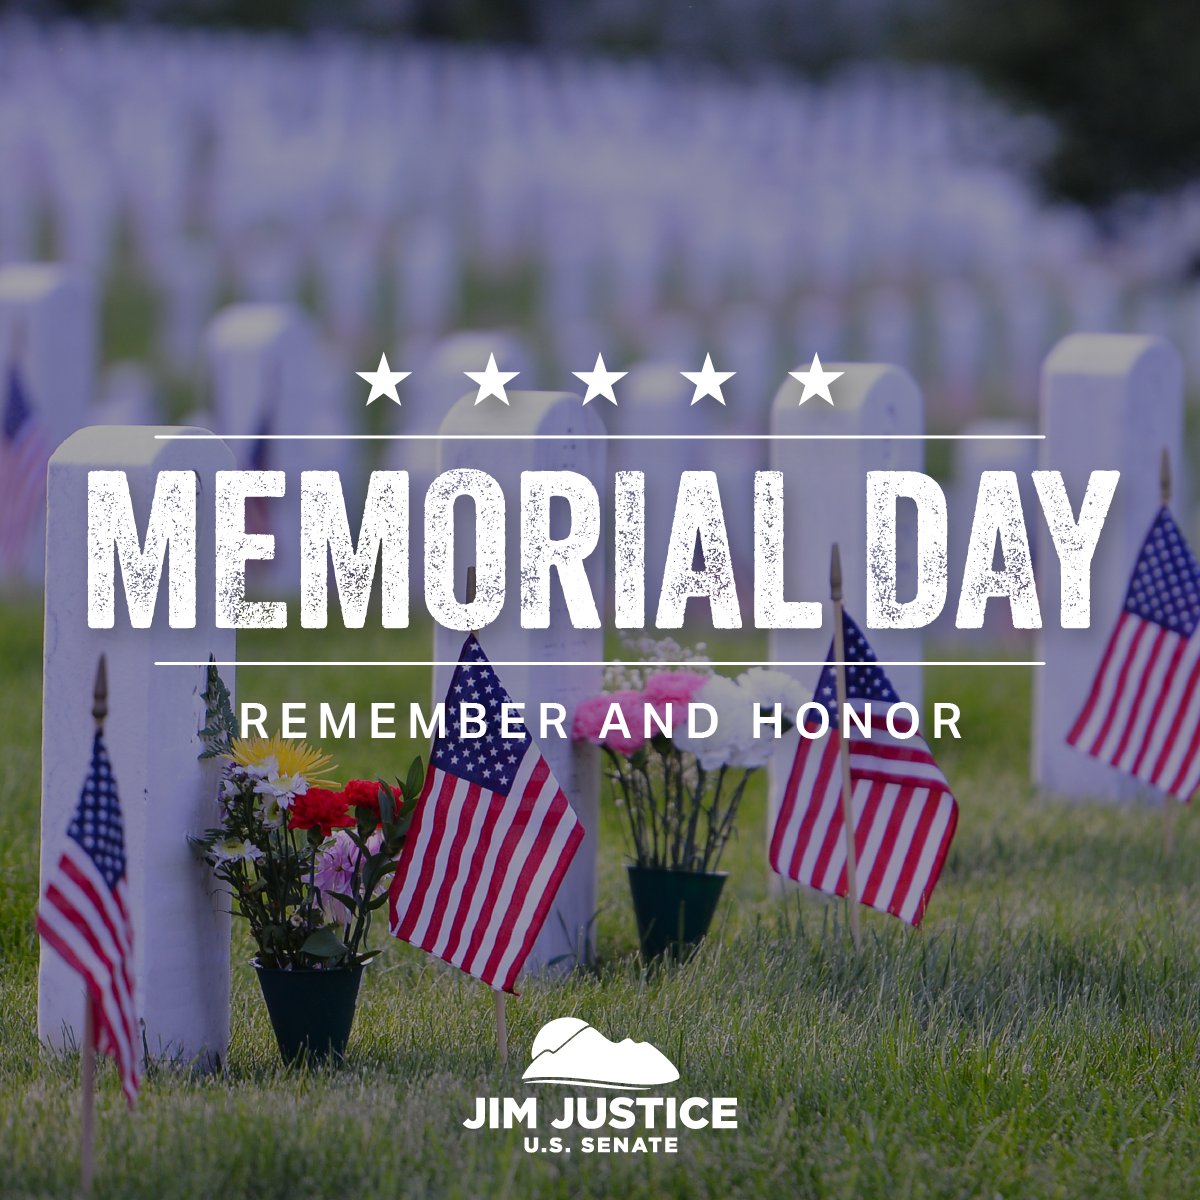 Today, we honor the brave men and women who made the ultimate sacrifice for our freedom. Their courage and dedication will never be forgotten.